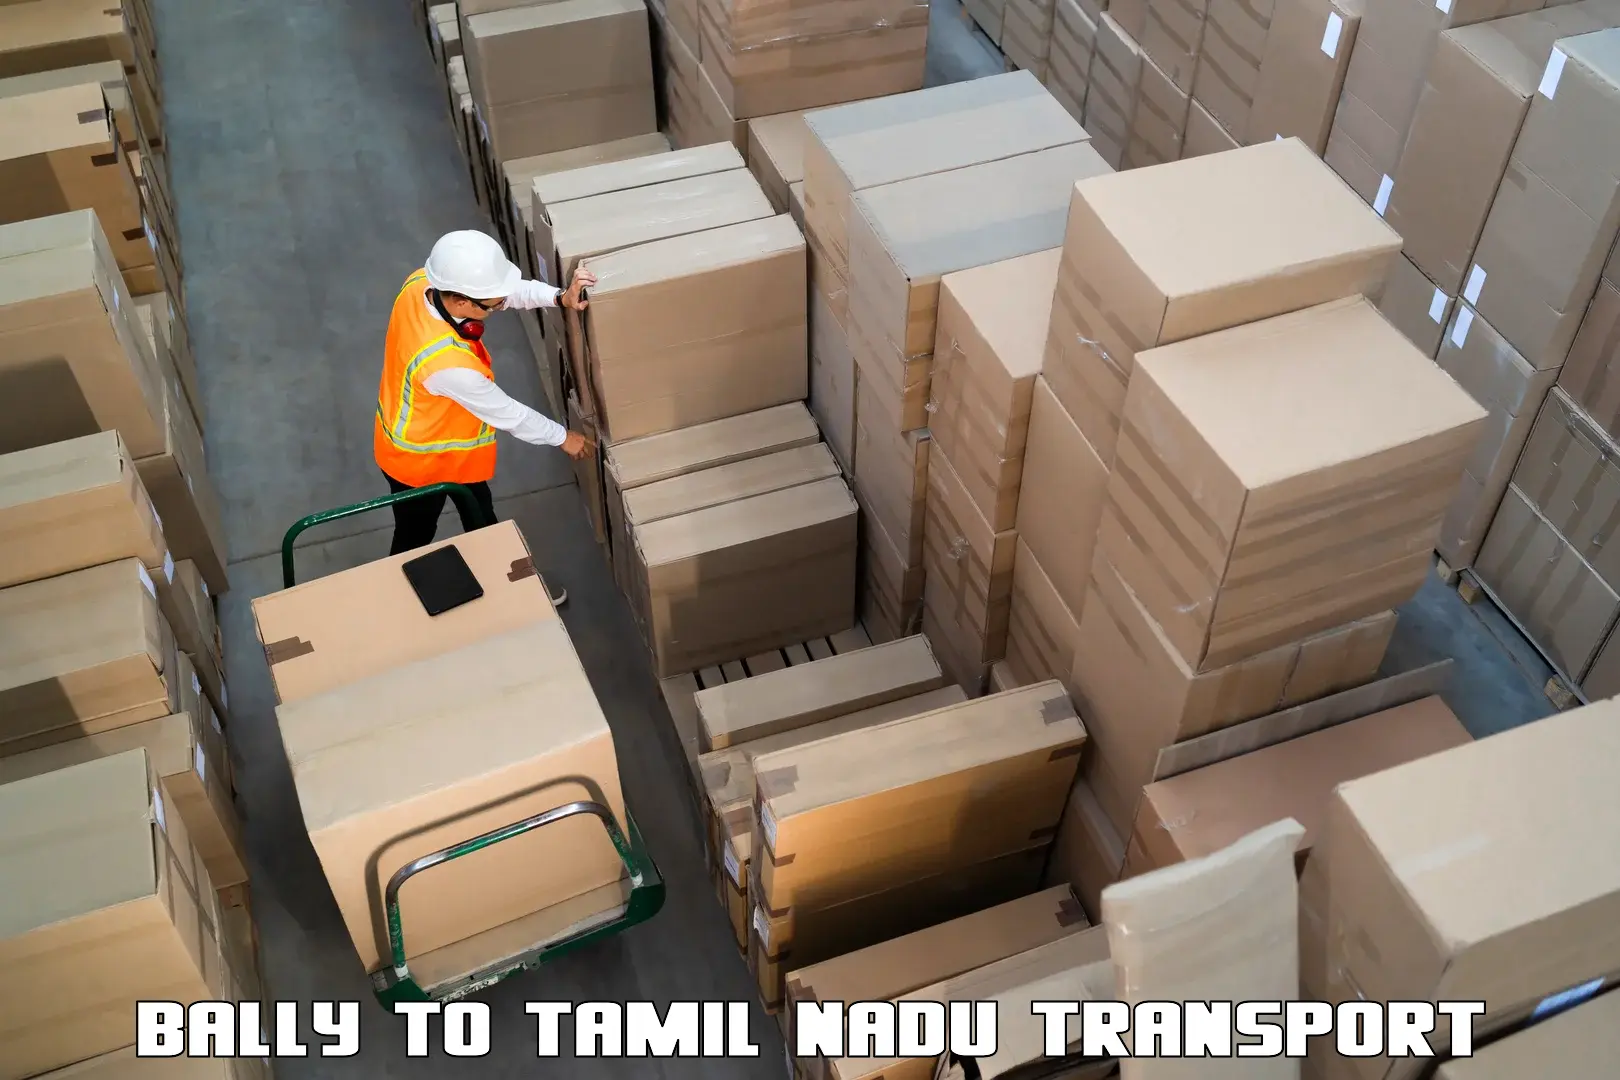 Luggage transport services Bally to Ennore Port Chennai